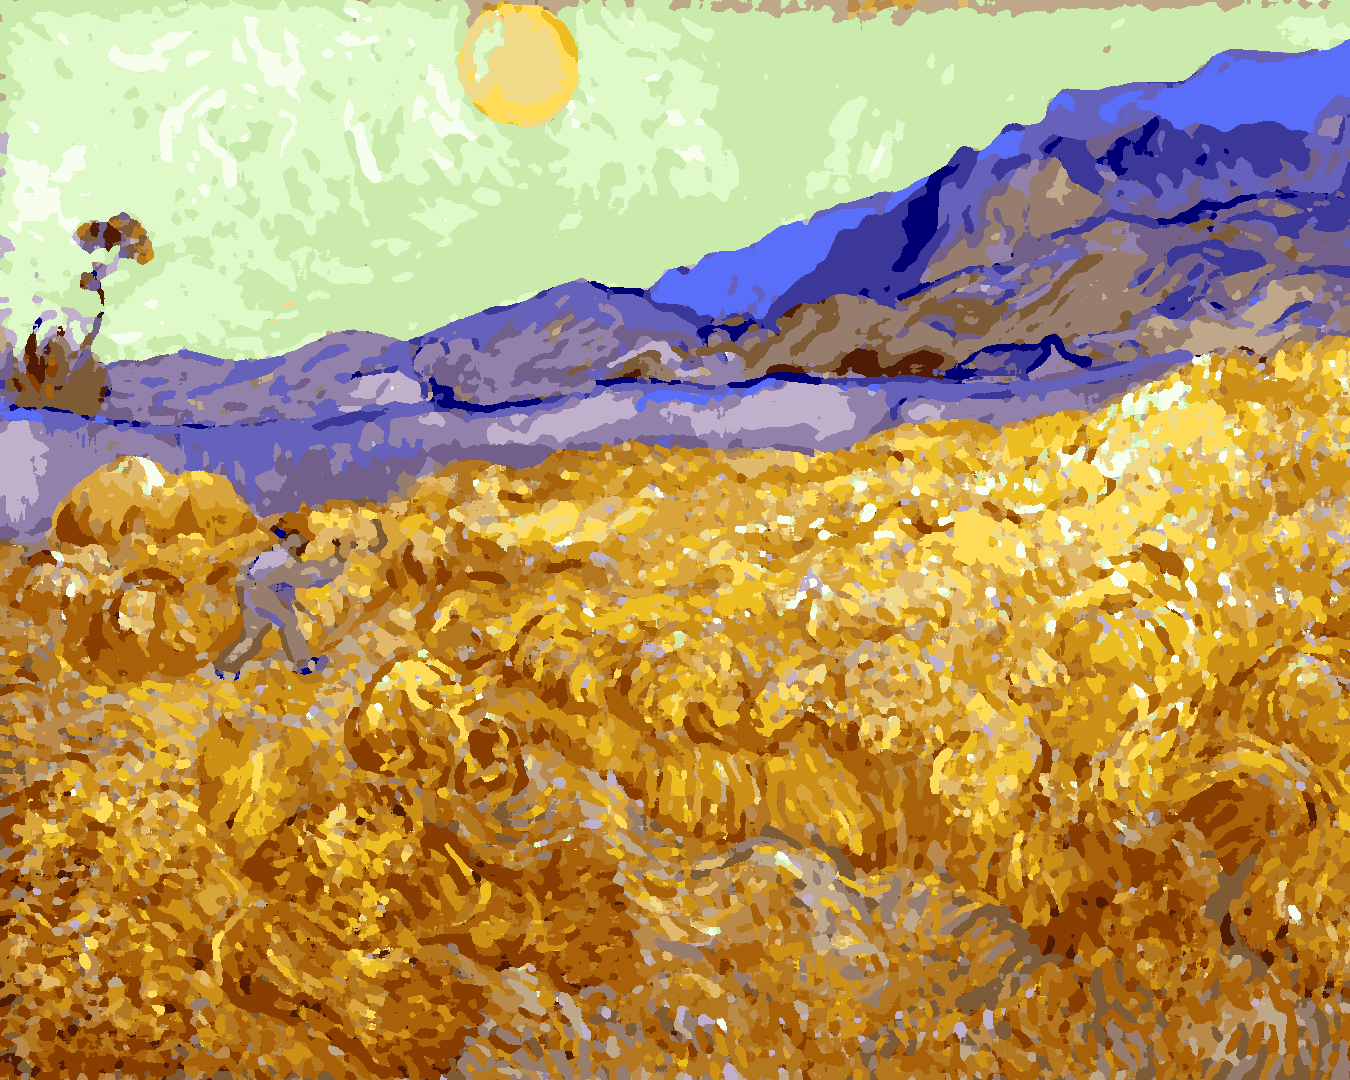 Vincent Van Gogh PD (200) - Wheatfield with a reaper - Van-Go Paint-By-Number Kit